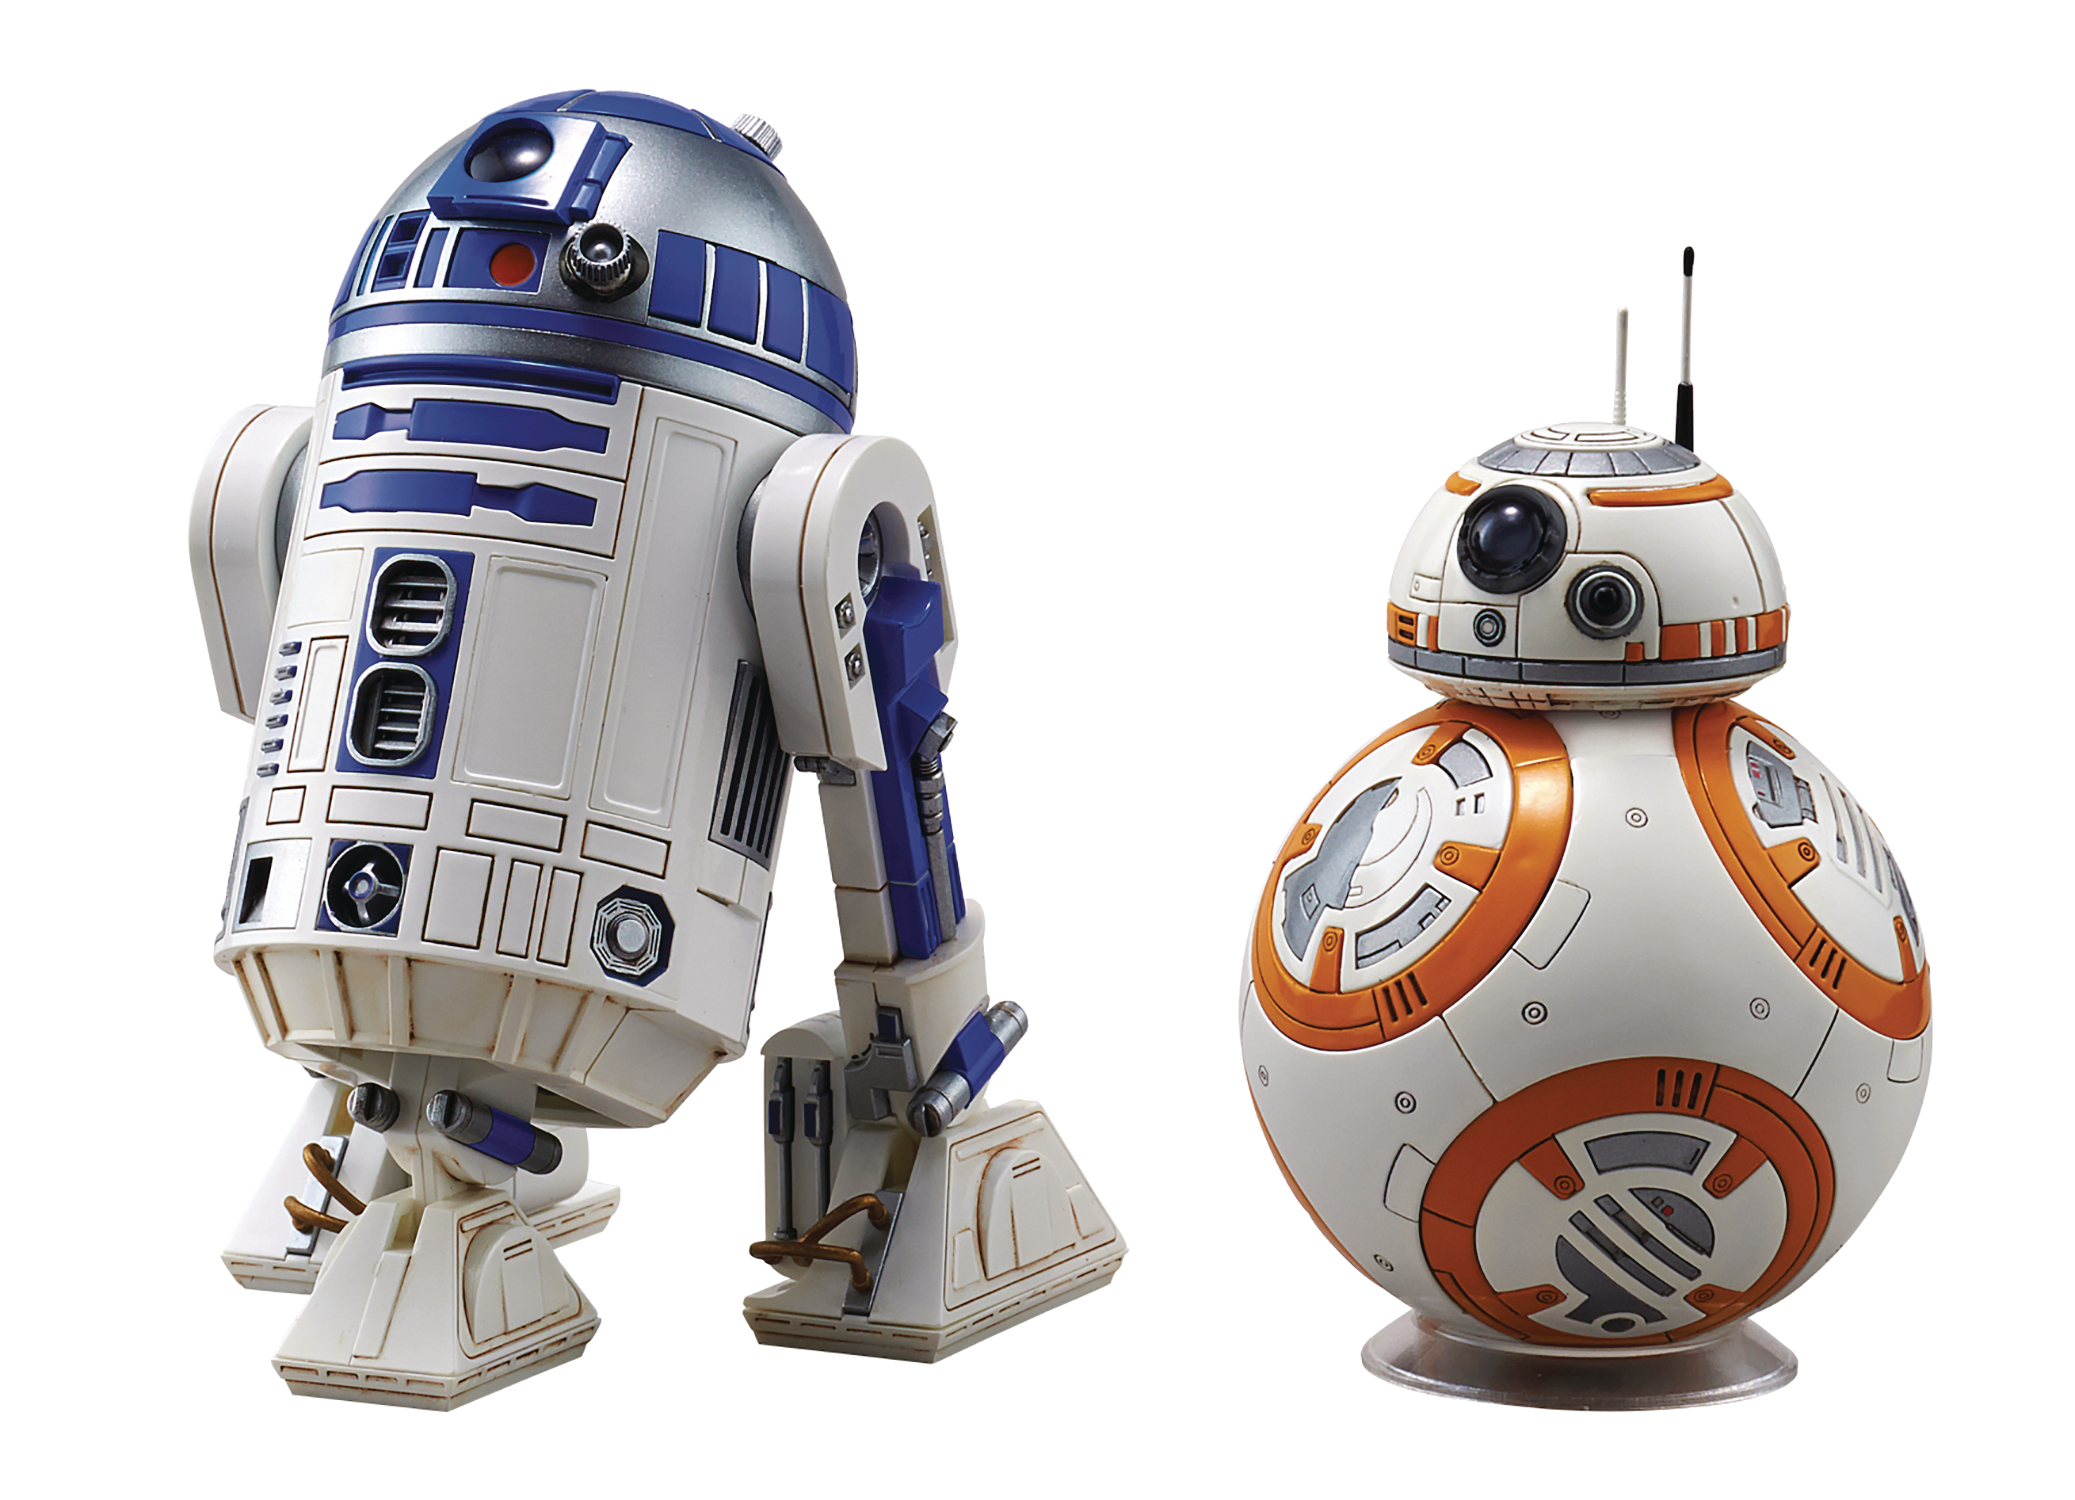 Bandai 1/12 Star Wars Bb-8 & R2-d2 The Force Awakens From Japan Bb8 R2d2 for sale online